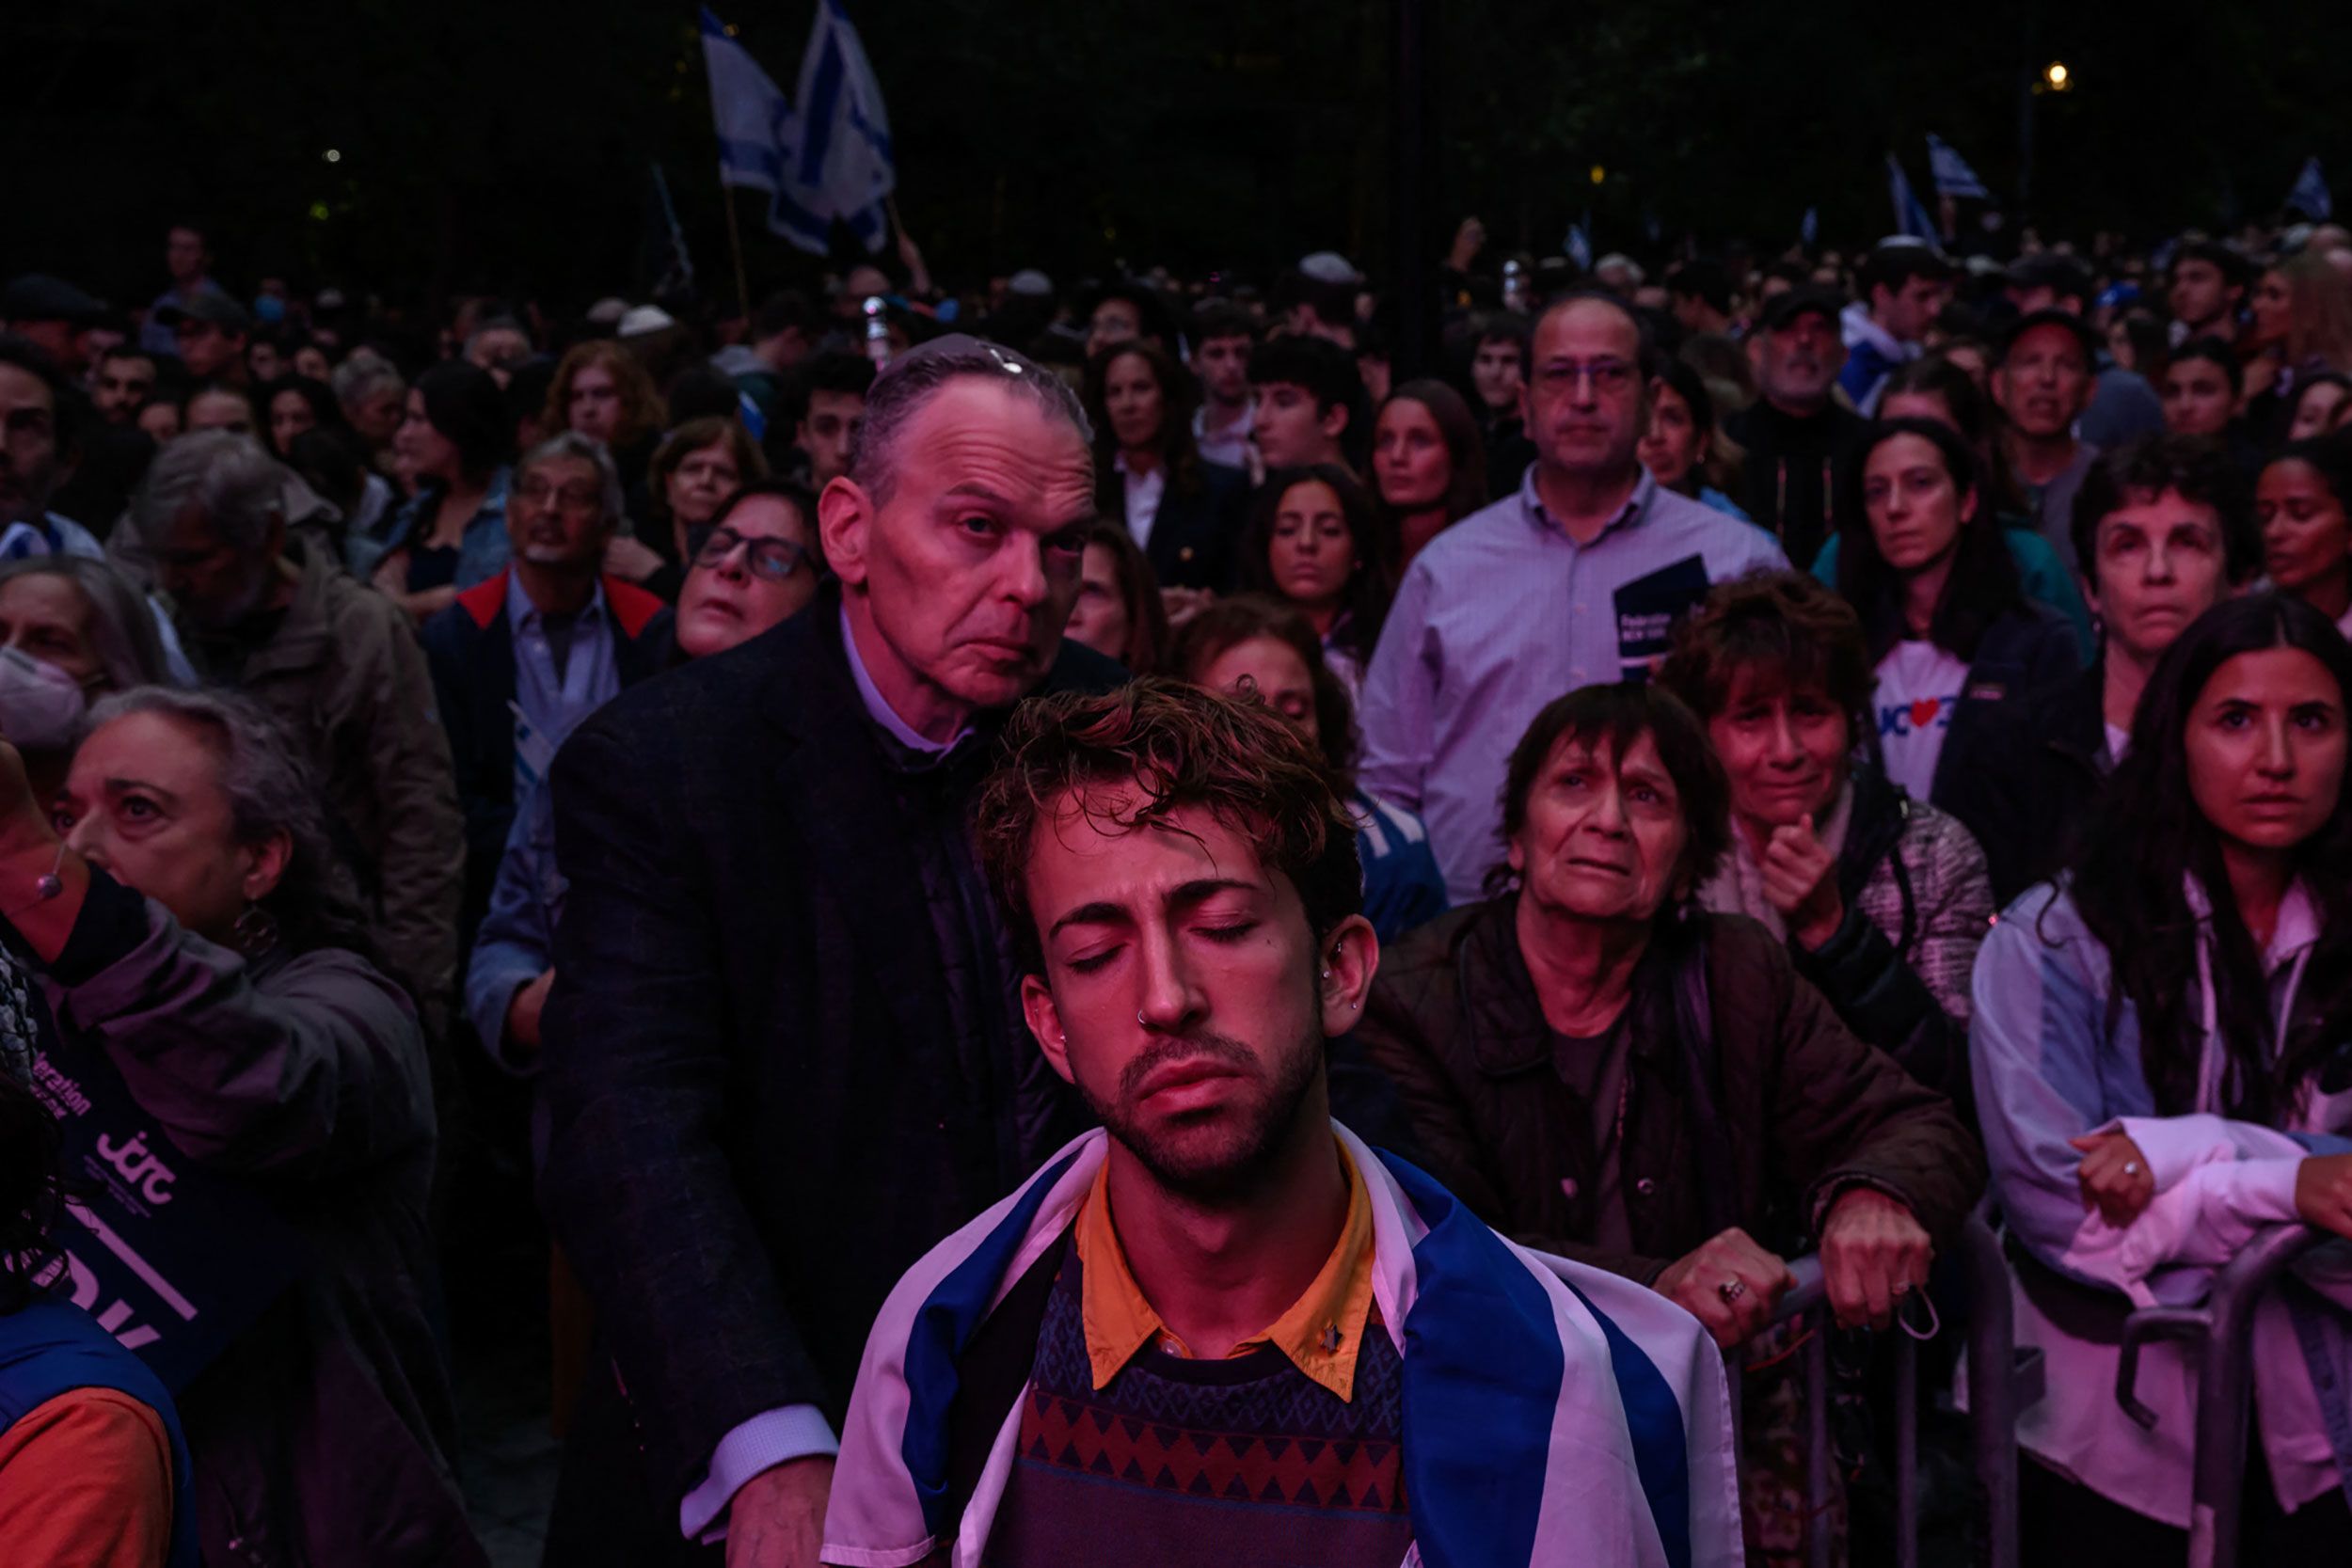 People in New York City attend a "Stand with Israel" vigil and rally on Tuesday, October 10.